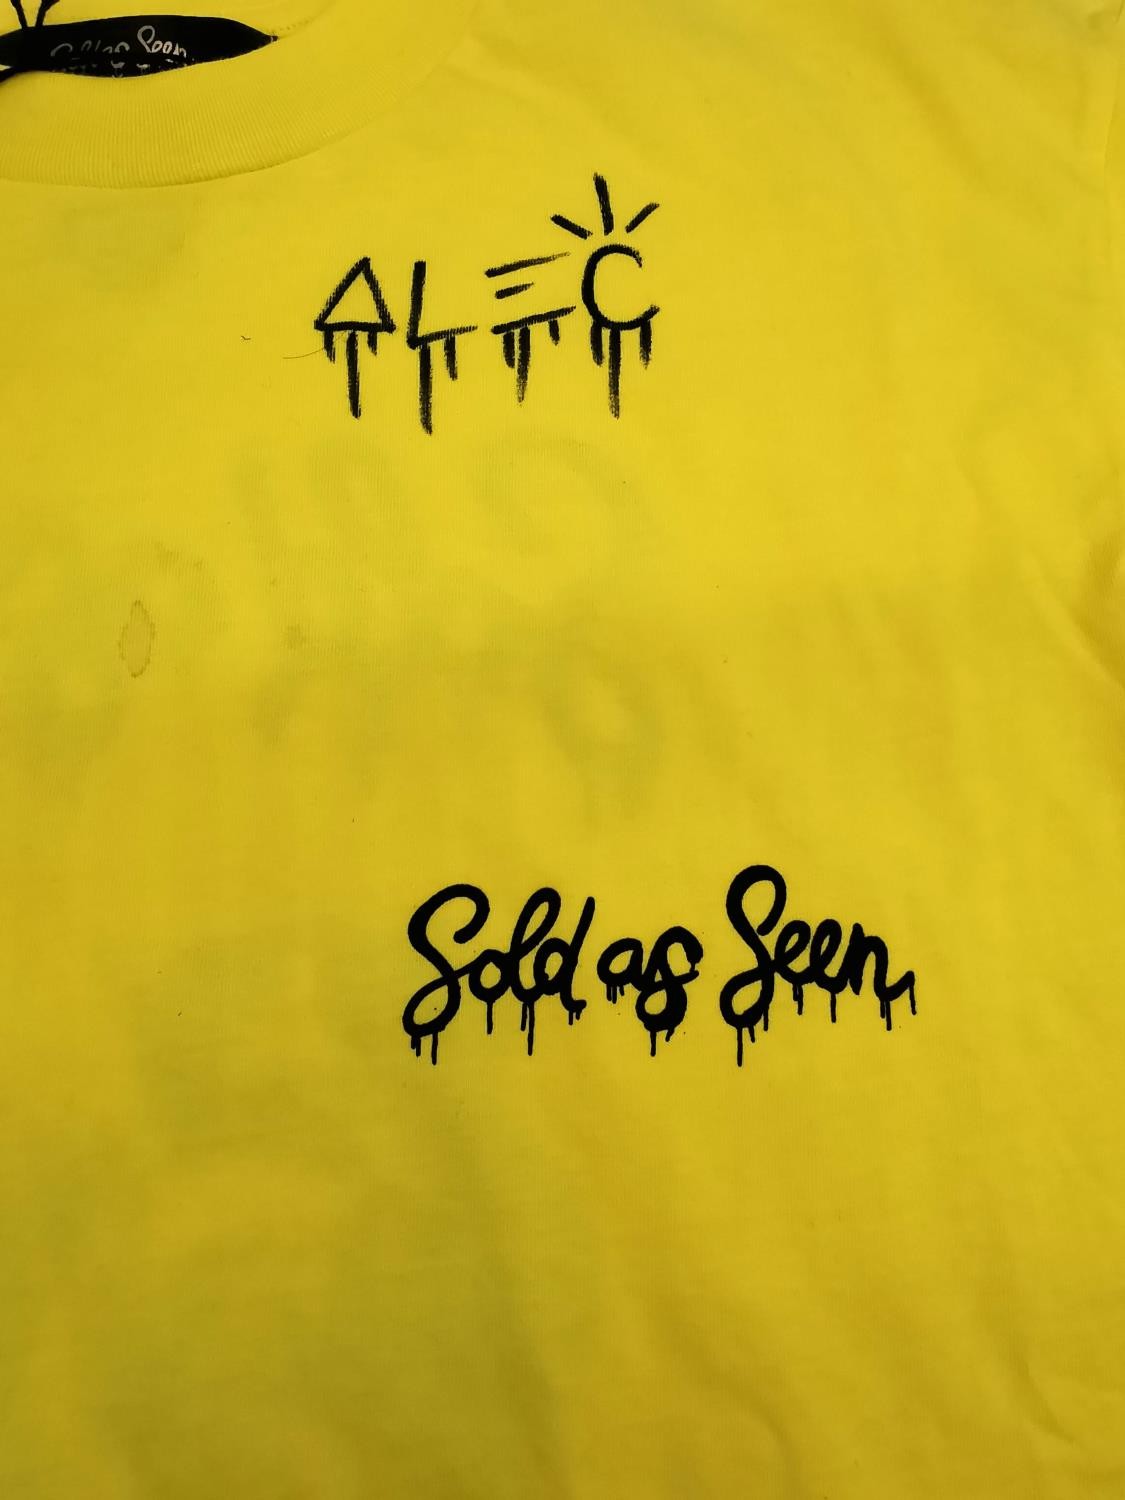 'Sold as Seen' signed T-shirt by the artist 'Alec Monopoly' size XS, measures 105cm from where the - Image 8 of 14